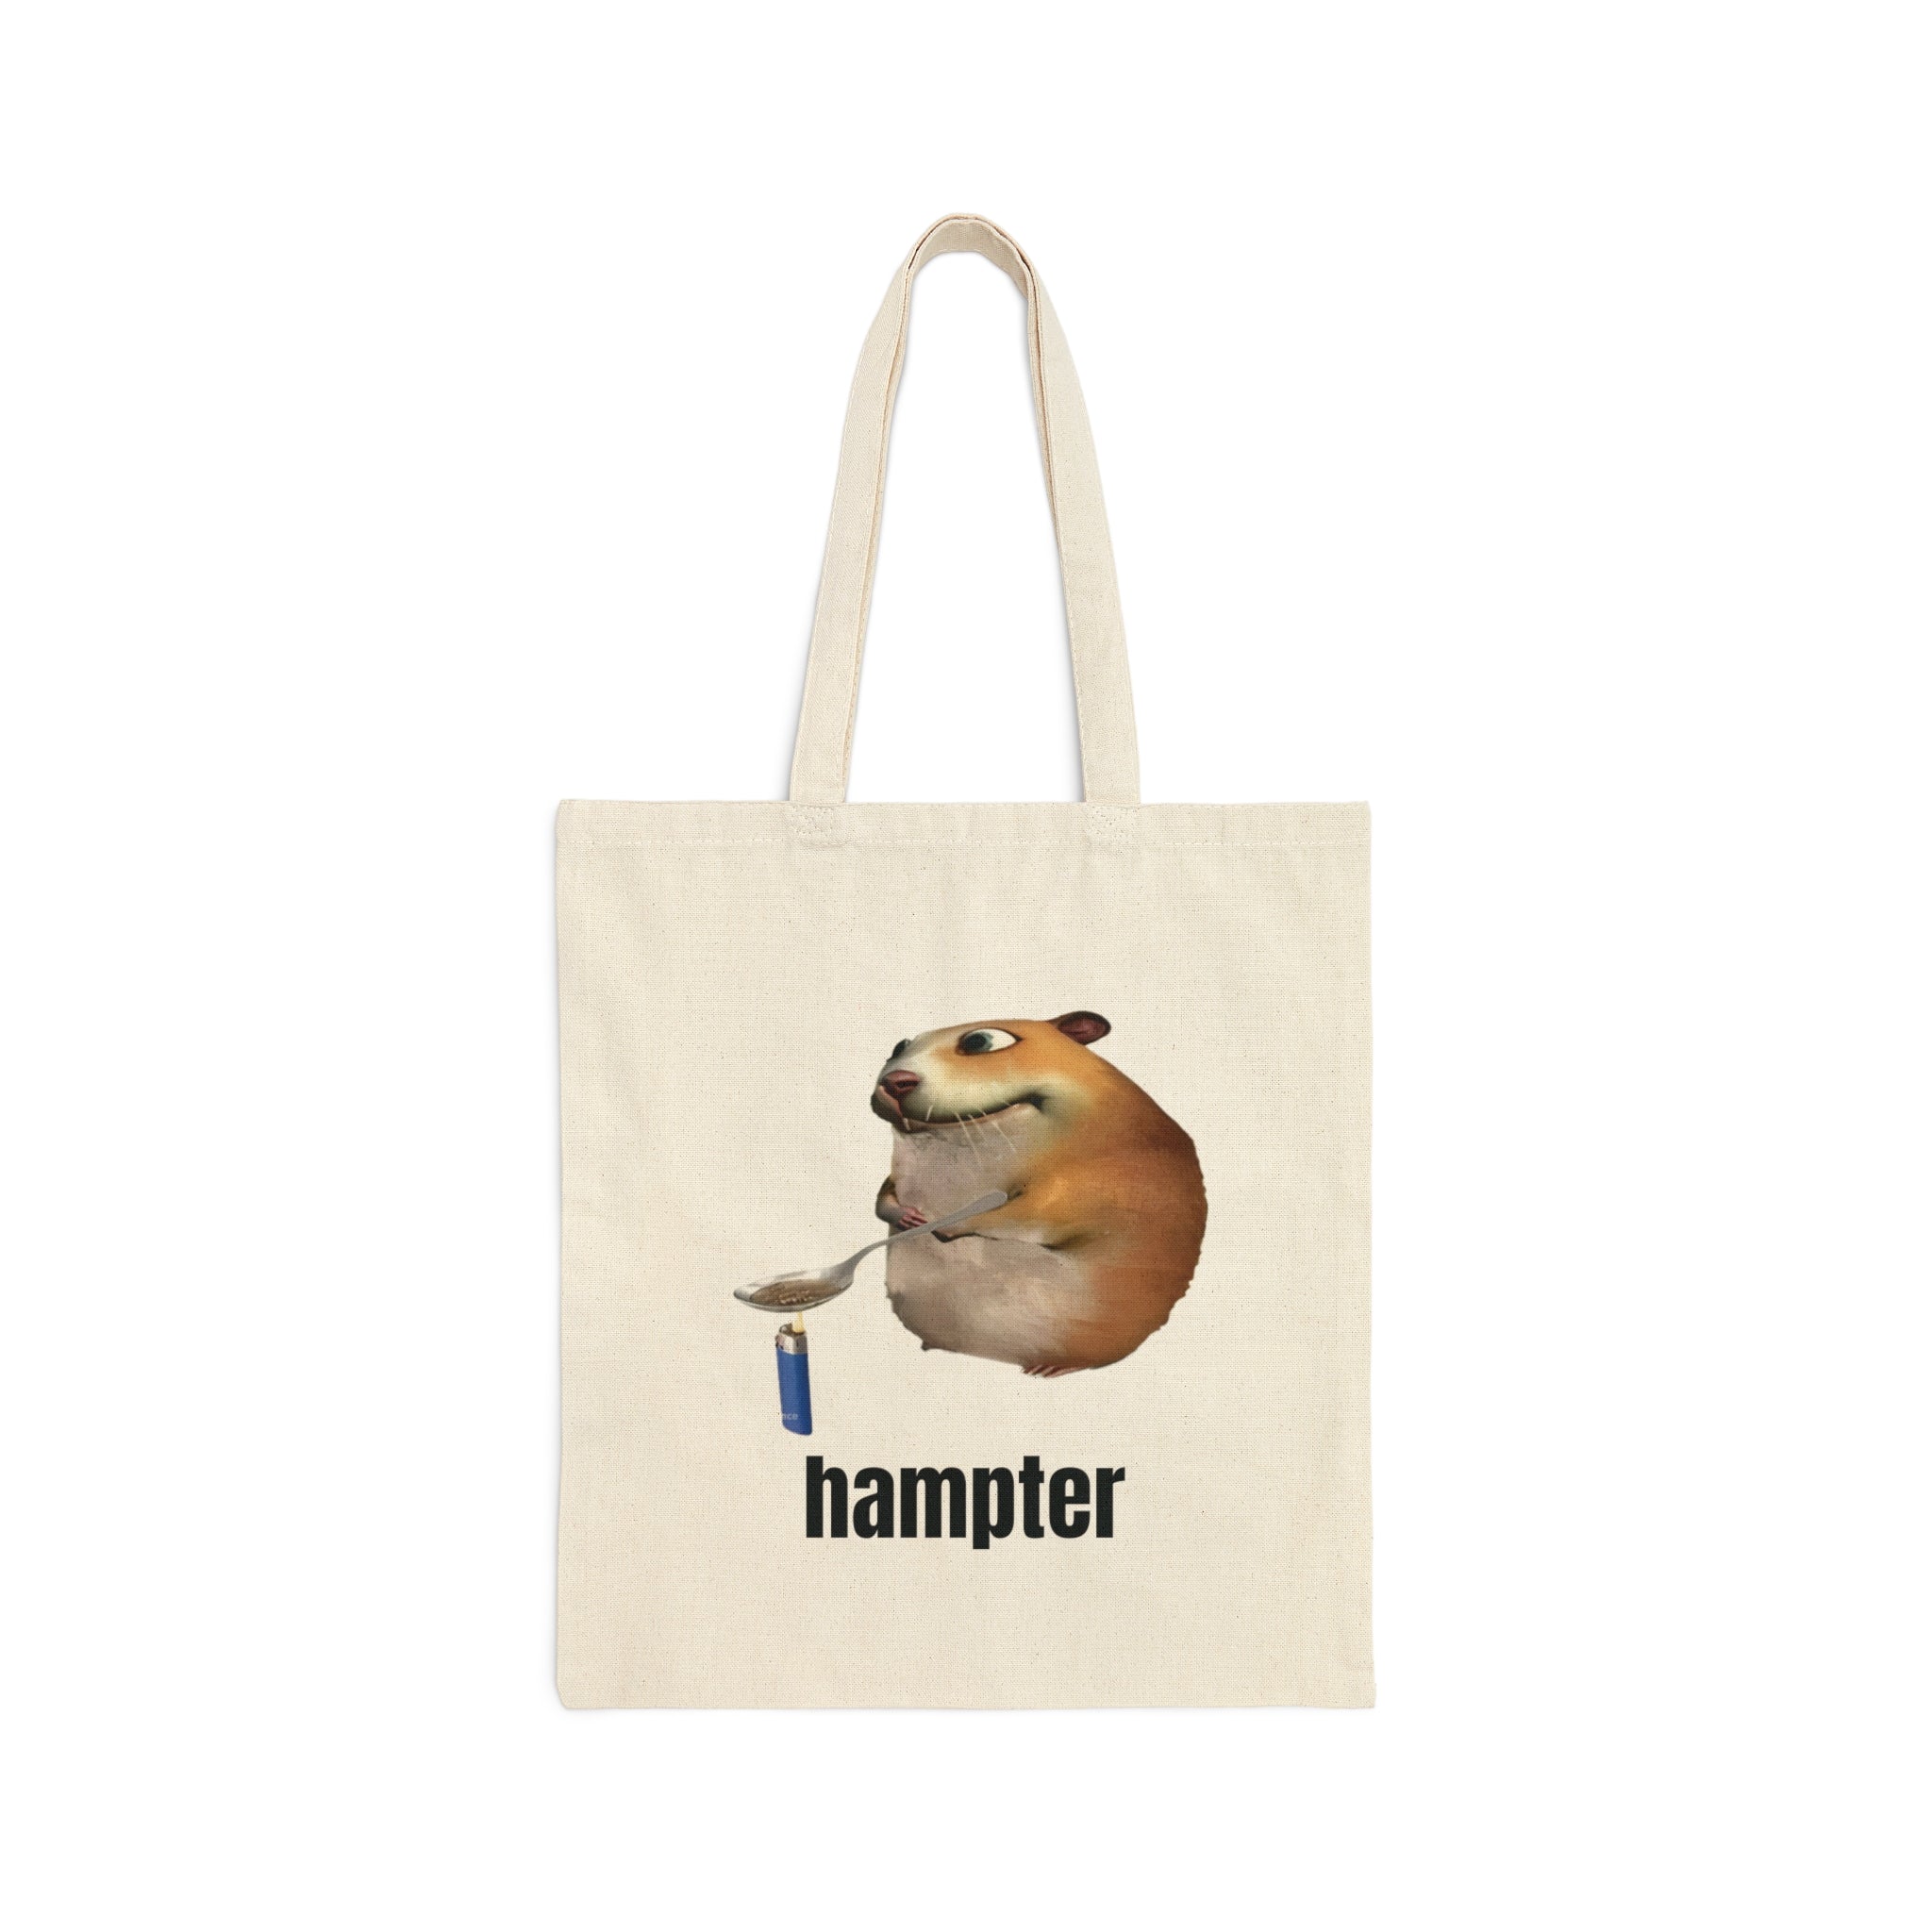 ''hampter'' Tote bag – Silly Tee Studio